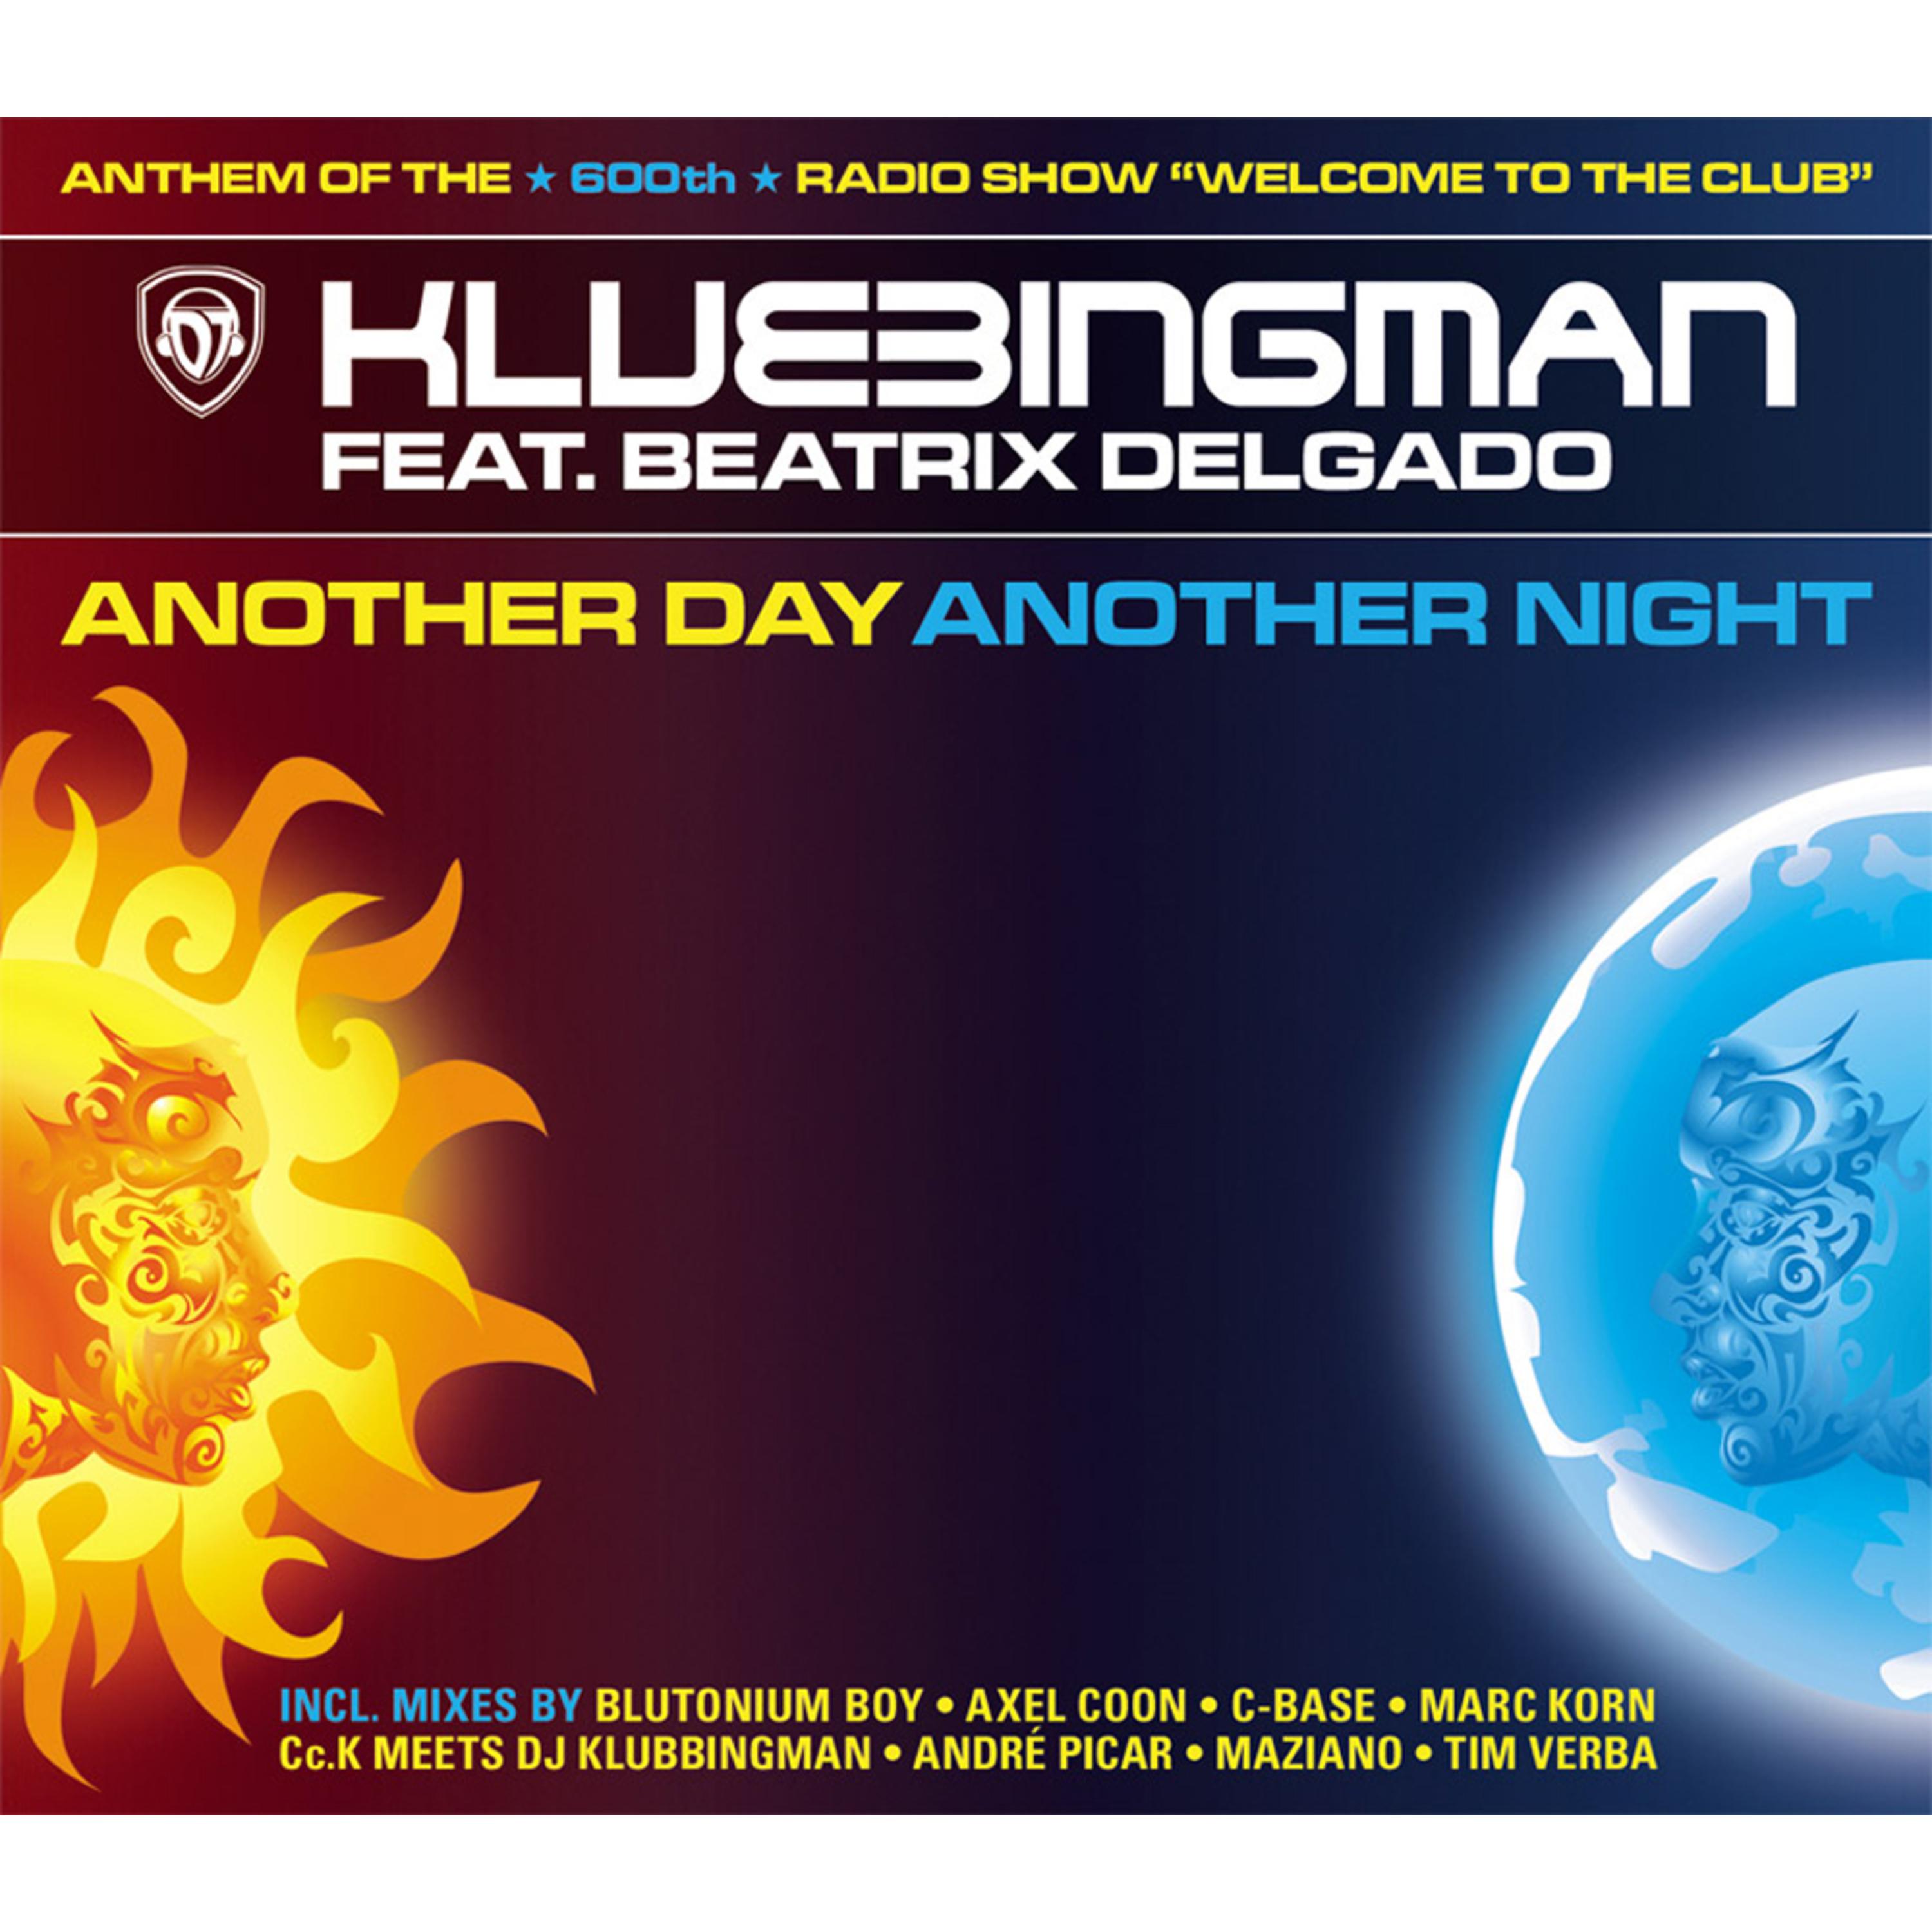 Another Day Another Night (Cc.K meets Klubbingman Club Radio)